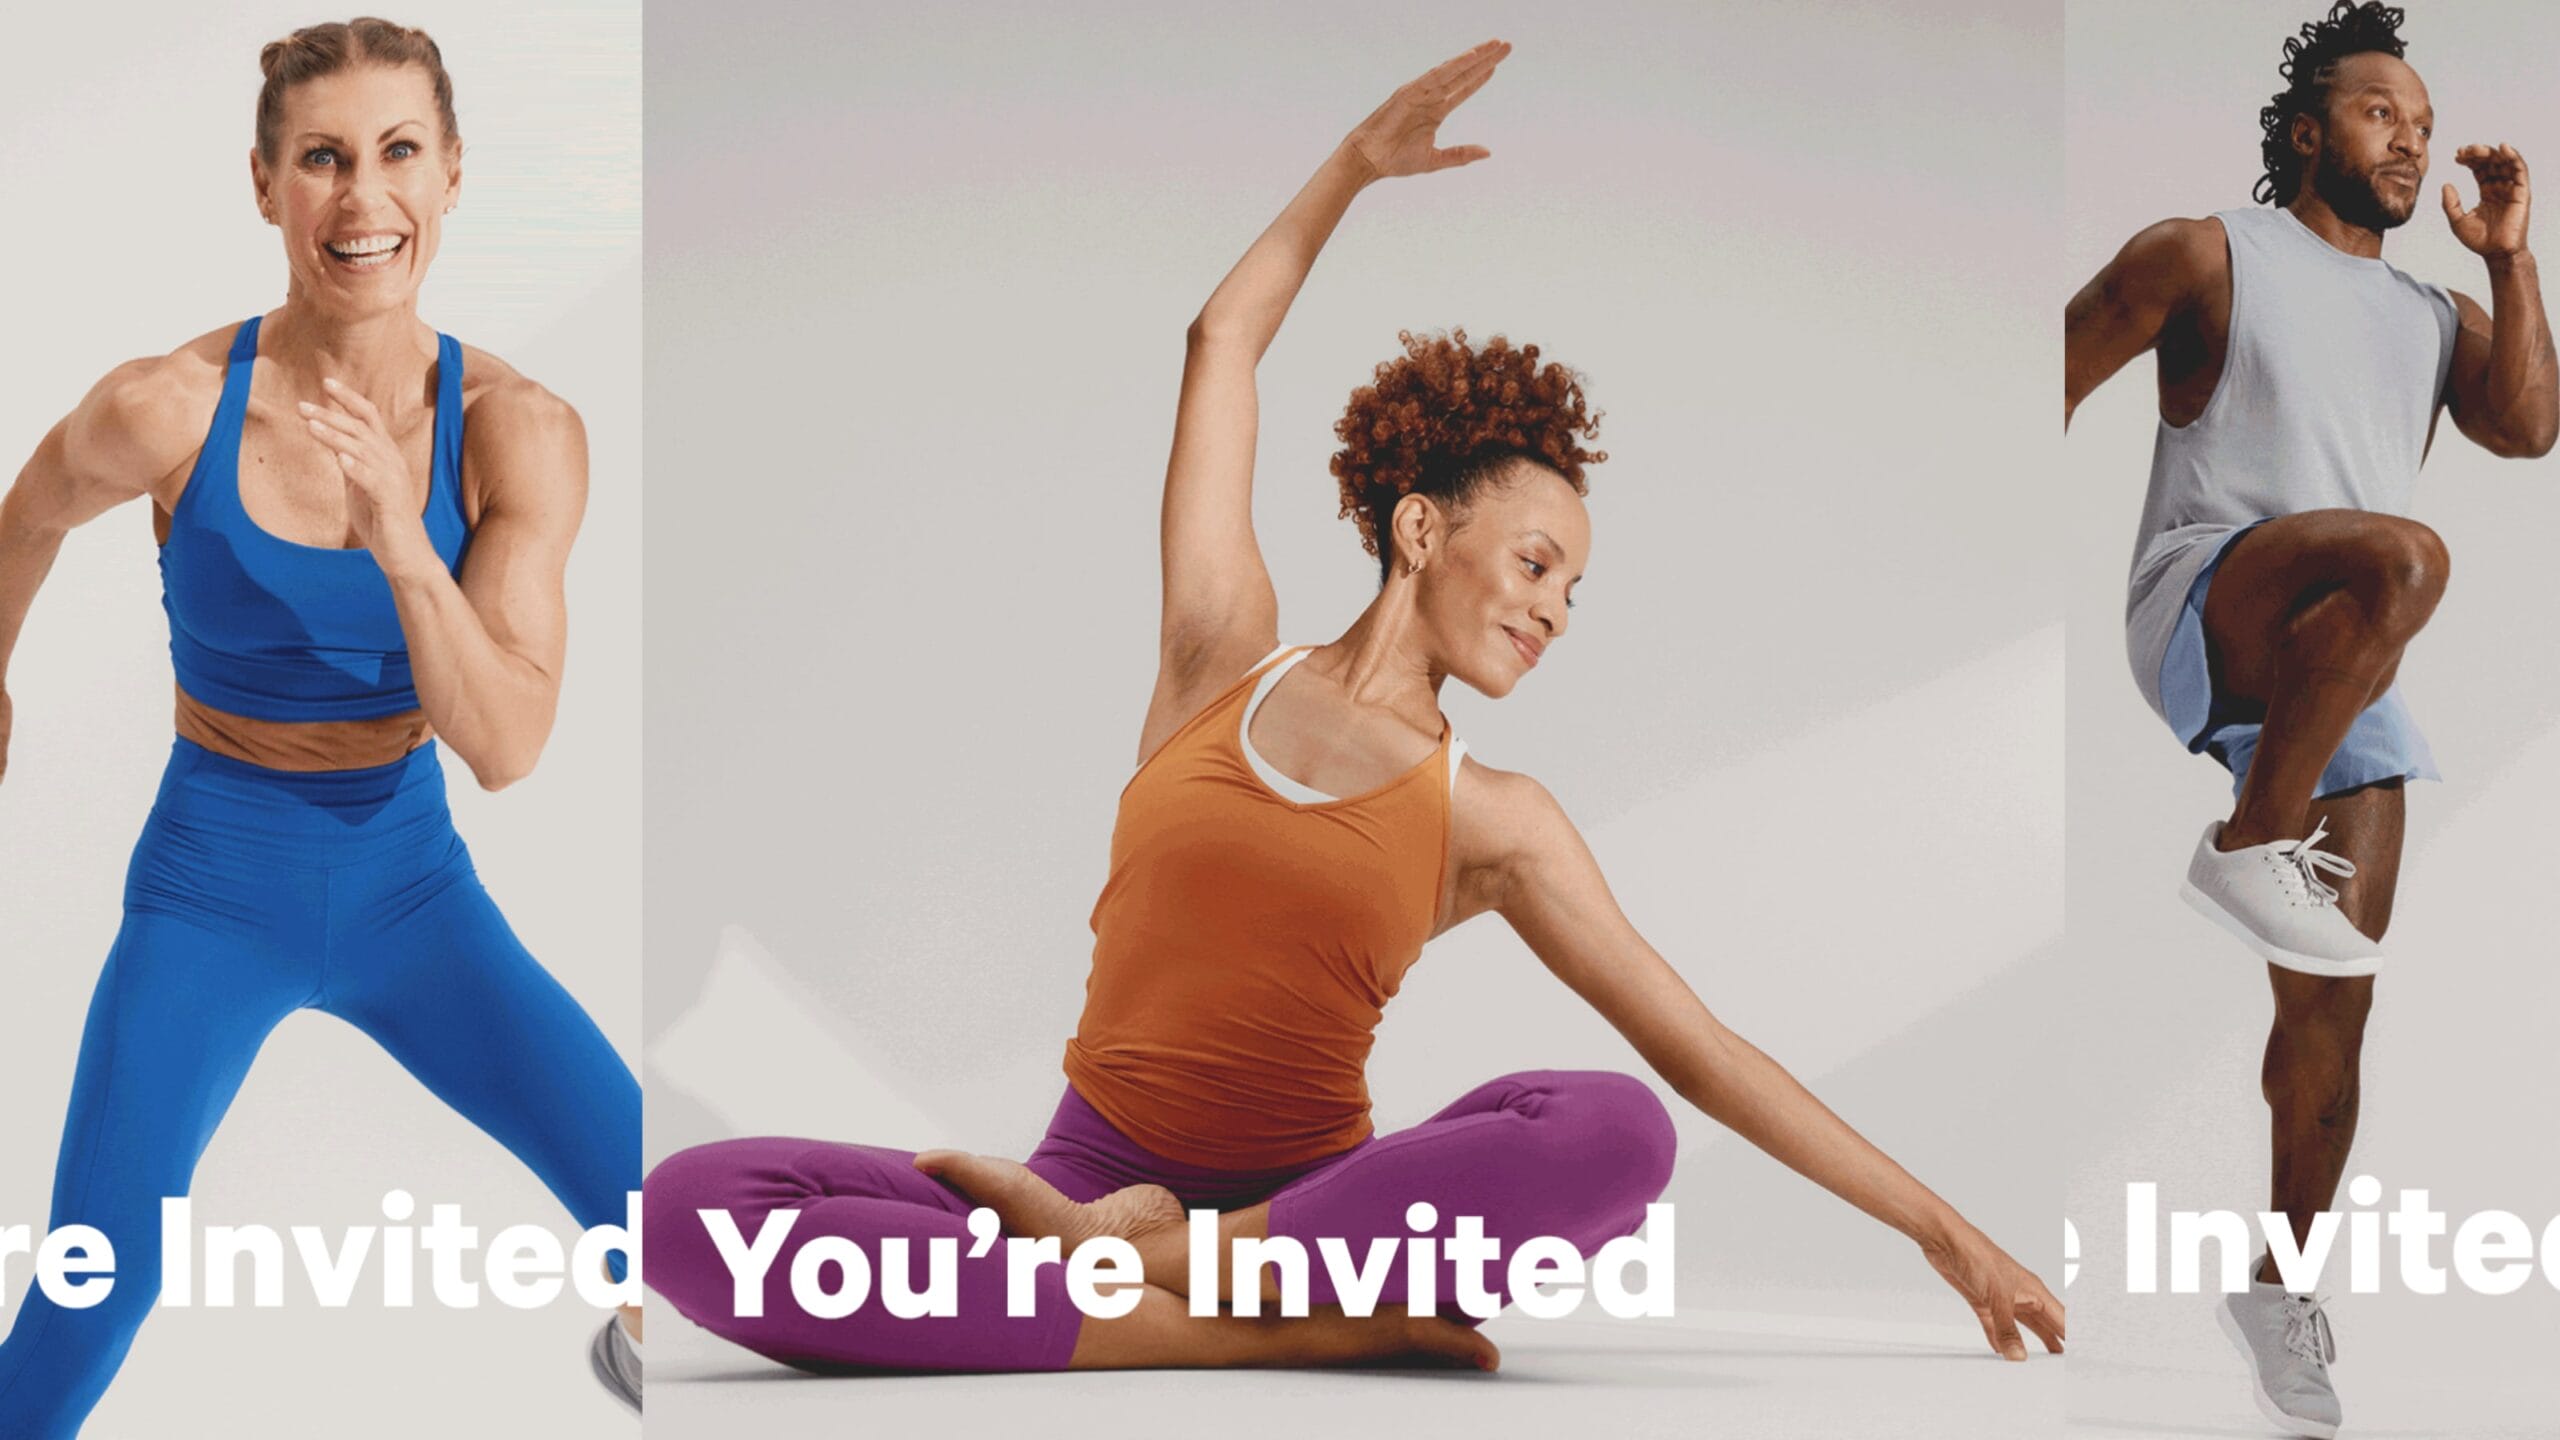 One of Lululemon's in-store yoga classes